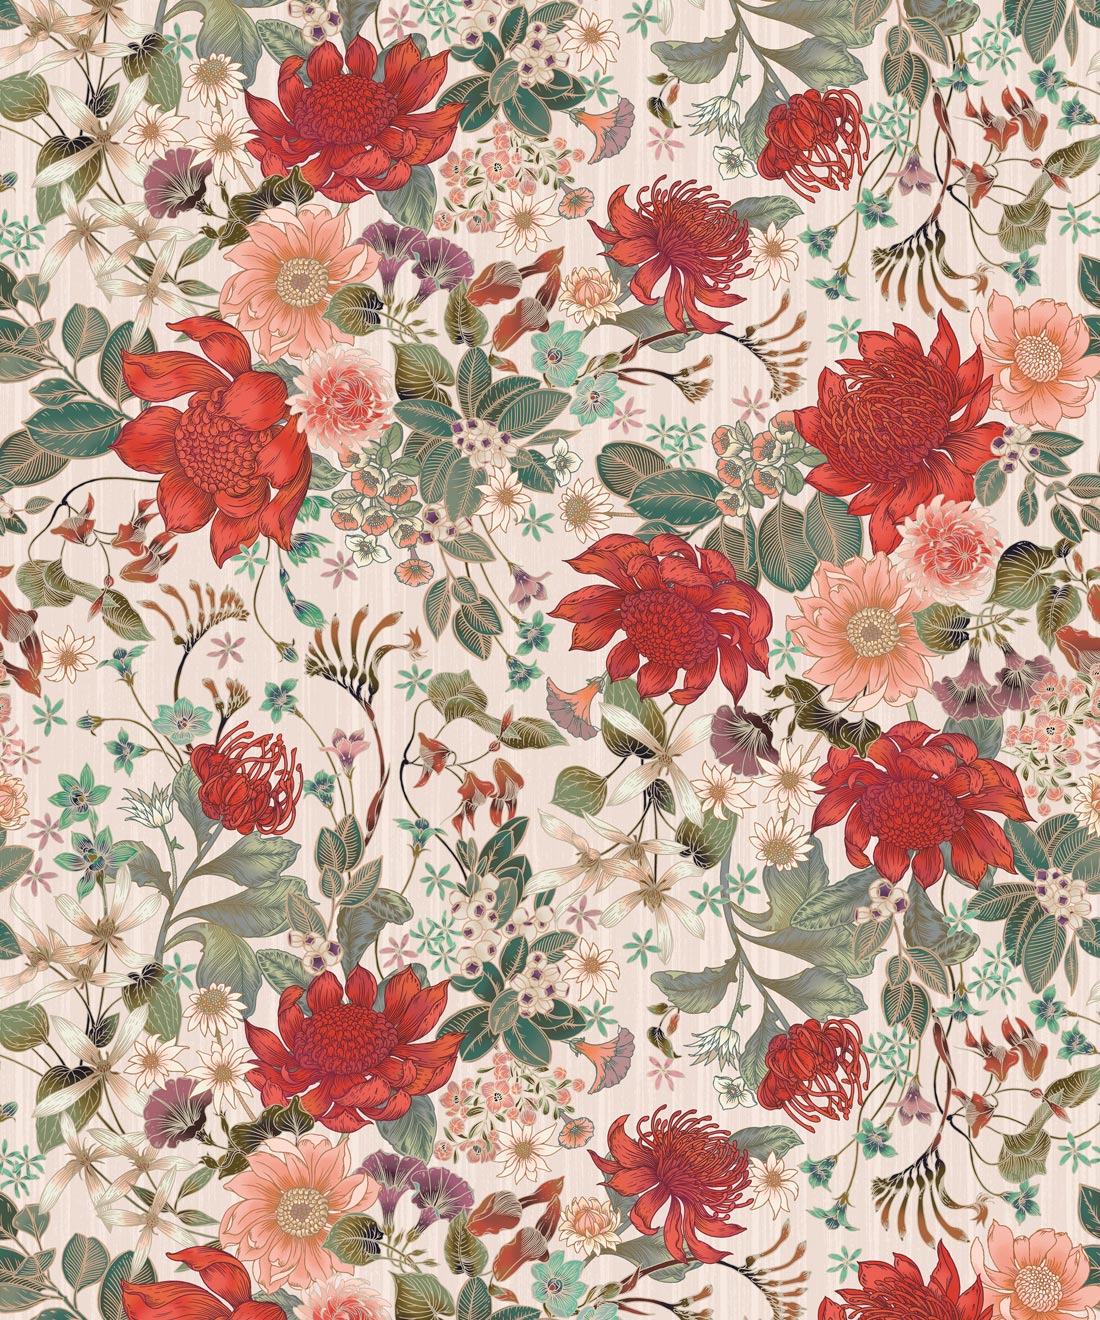 100% Cotton Fabric Red Rose on White Floral Print Craft Fabric